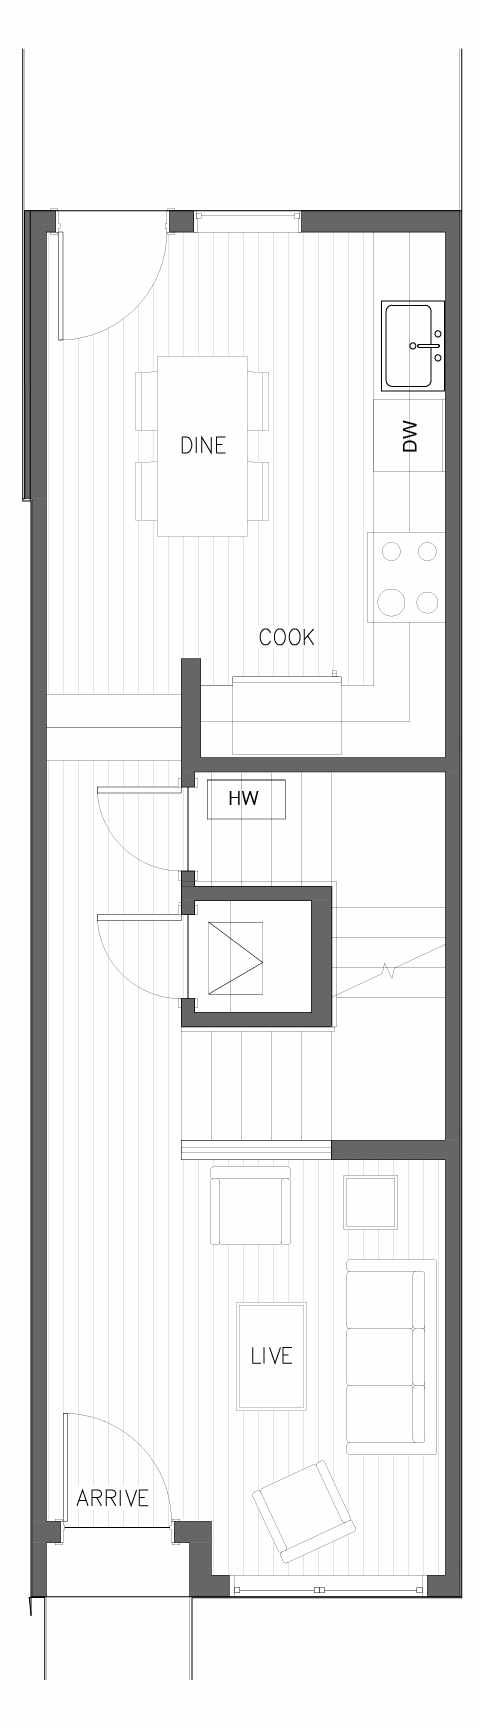 First Floor Plan of 5610 NE 60th St., One of the Kendal Townhomes in Windermere by Isola Homes